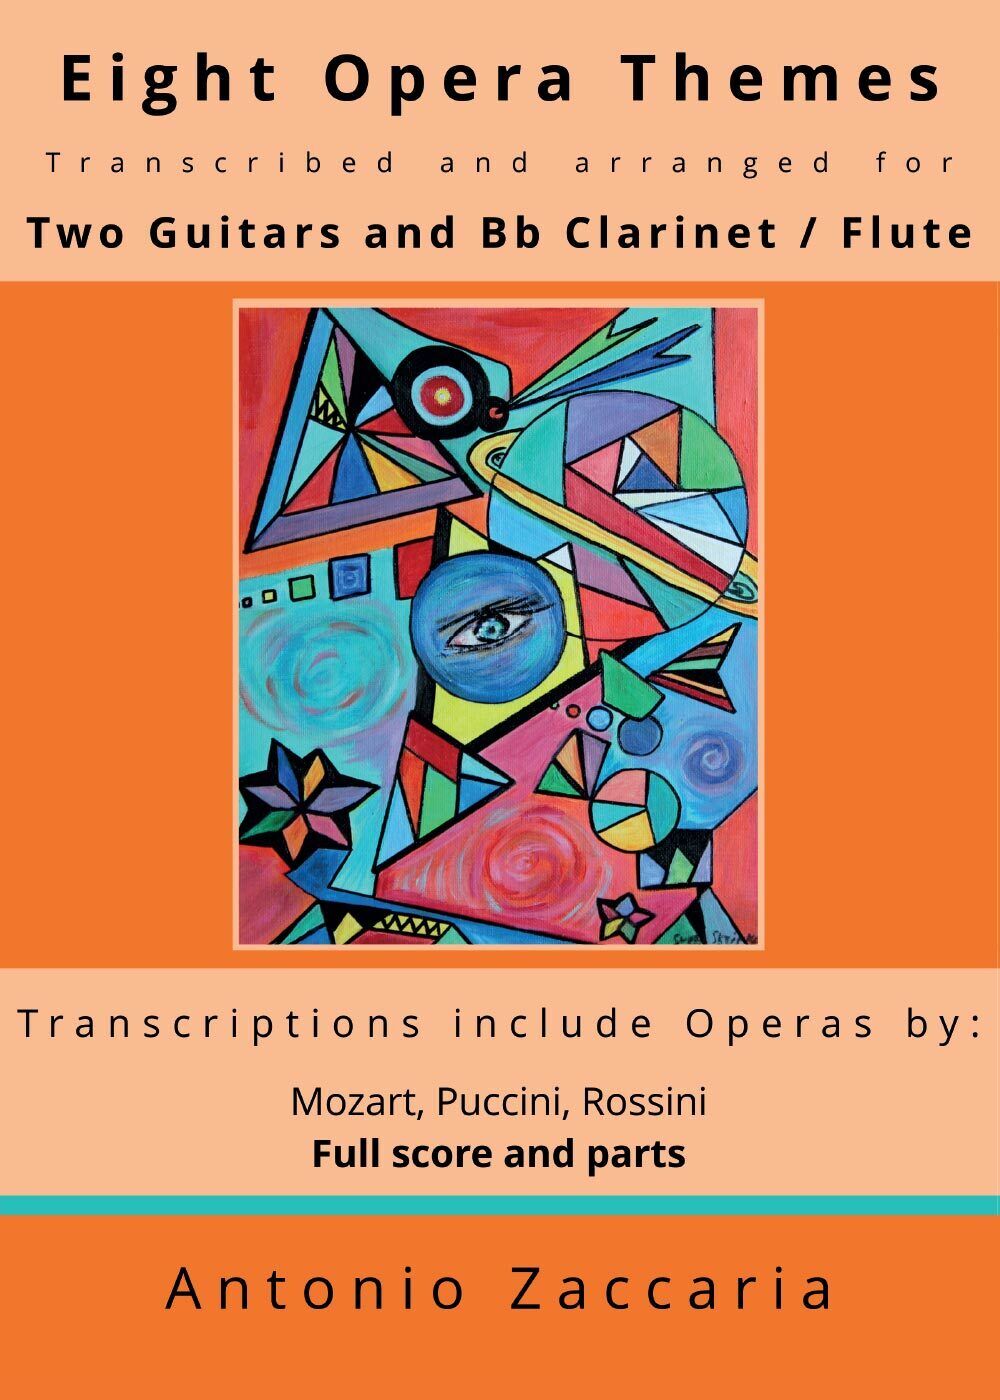 Eight Opera Themes Transcribed and Arranged for Two Guitars and BB Clarinet / Fl